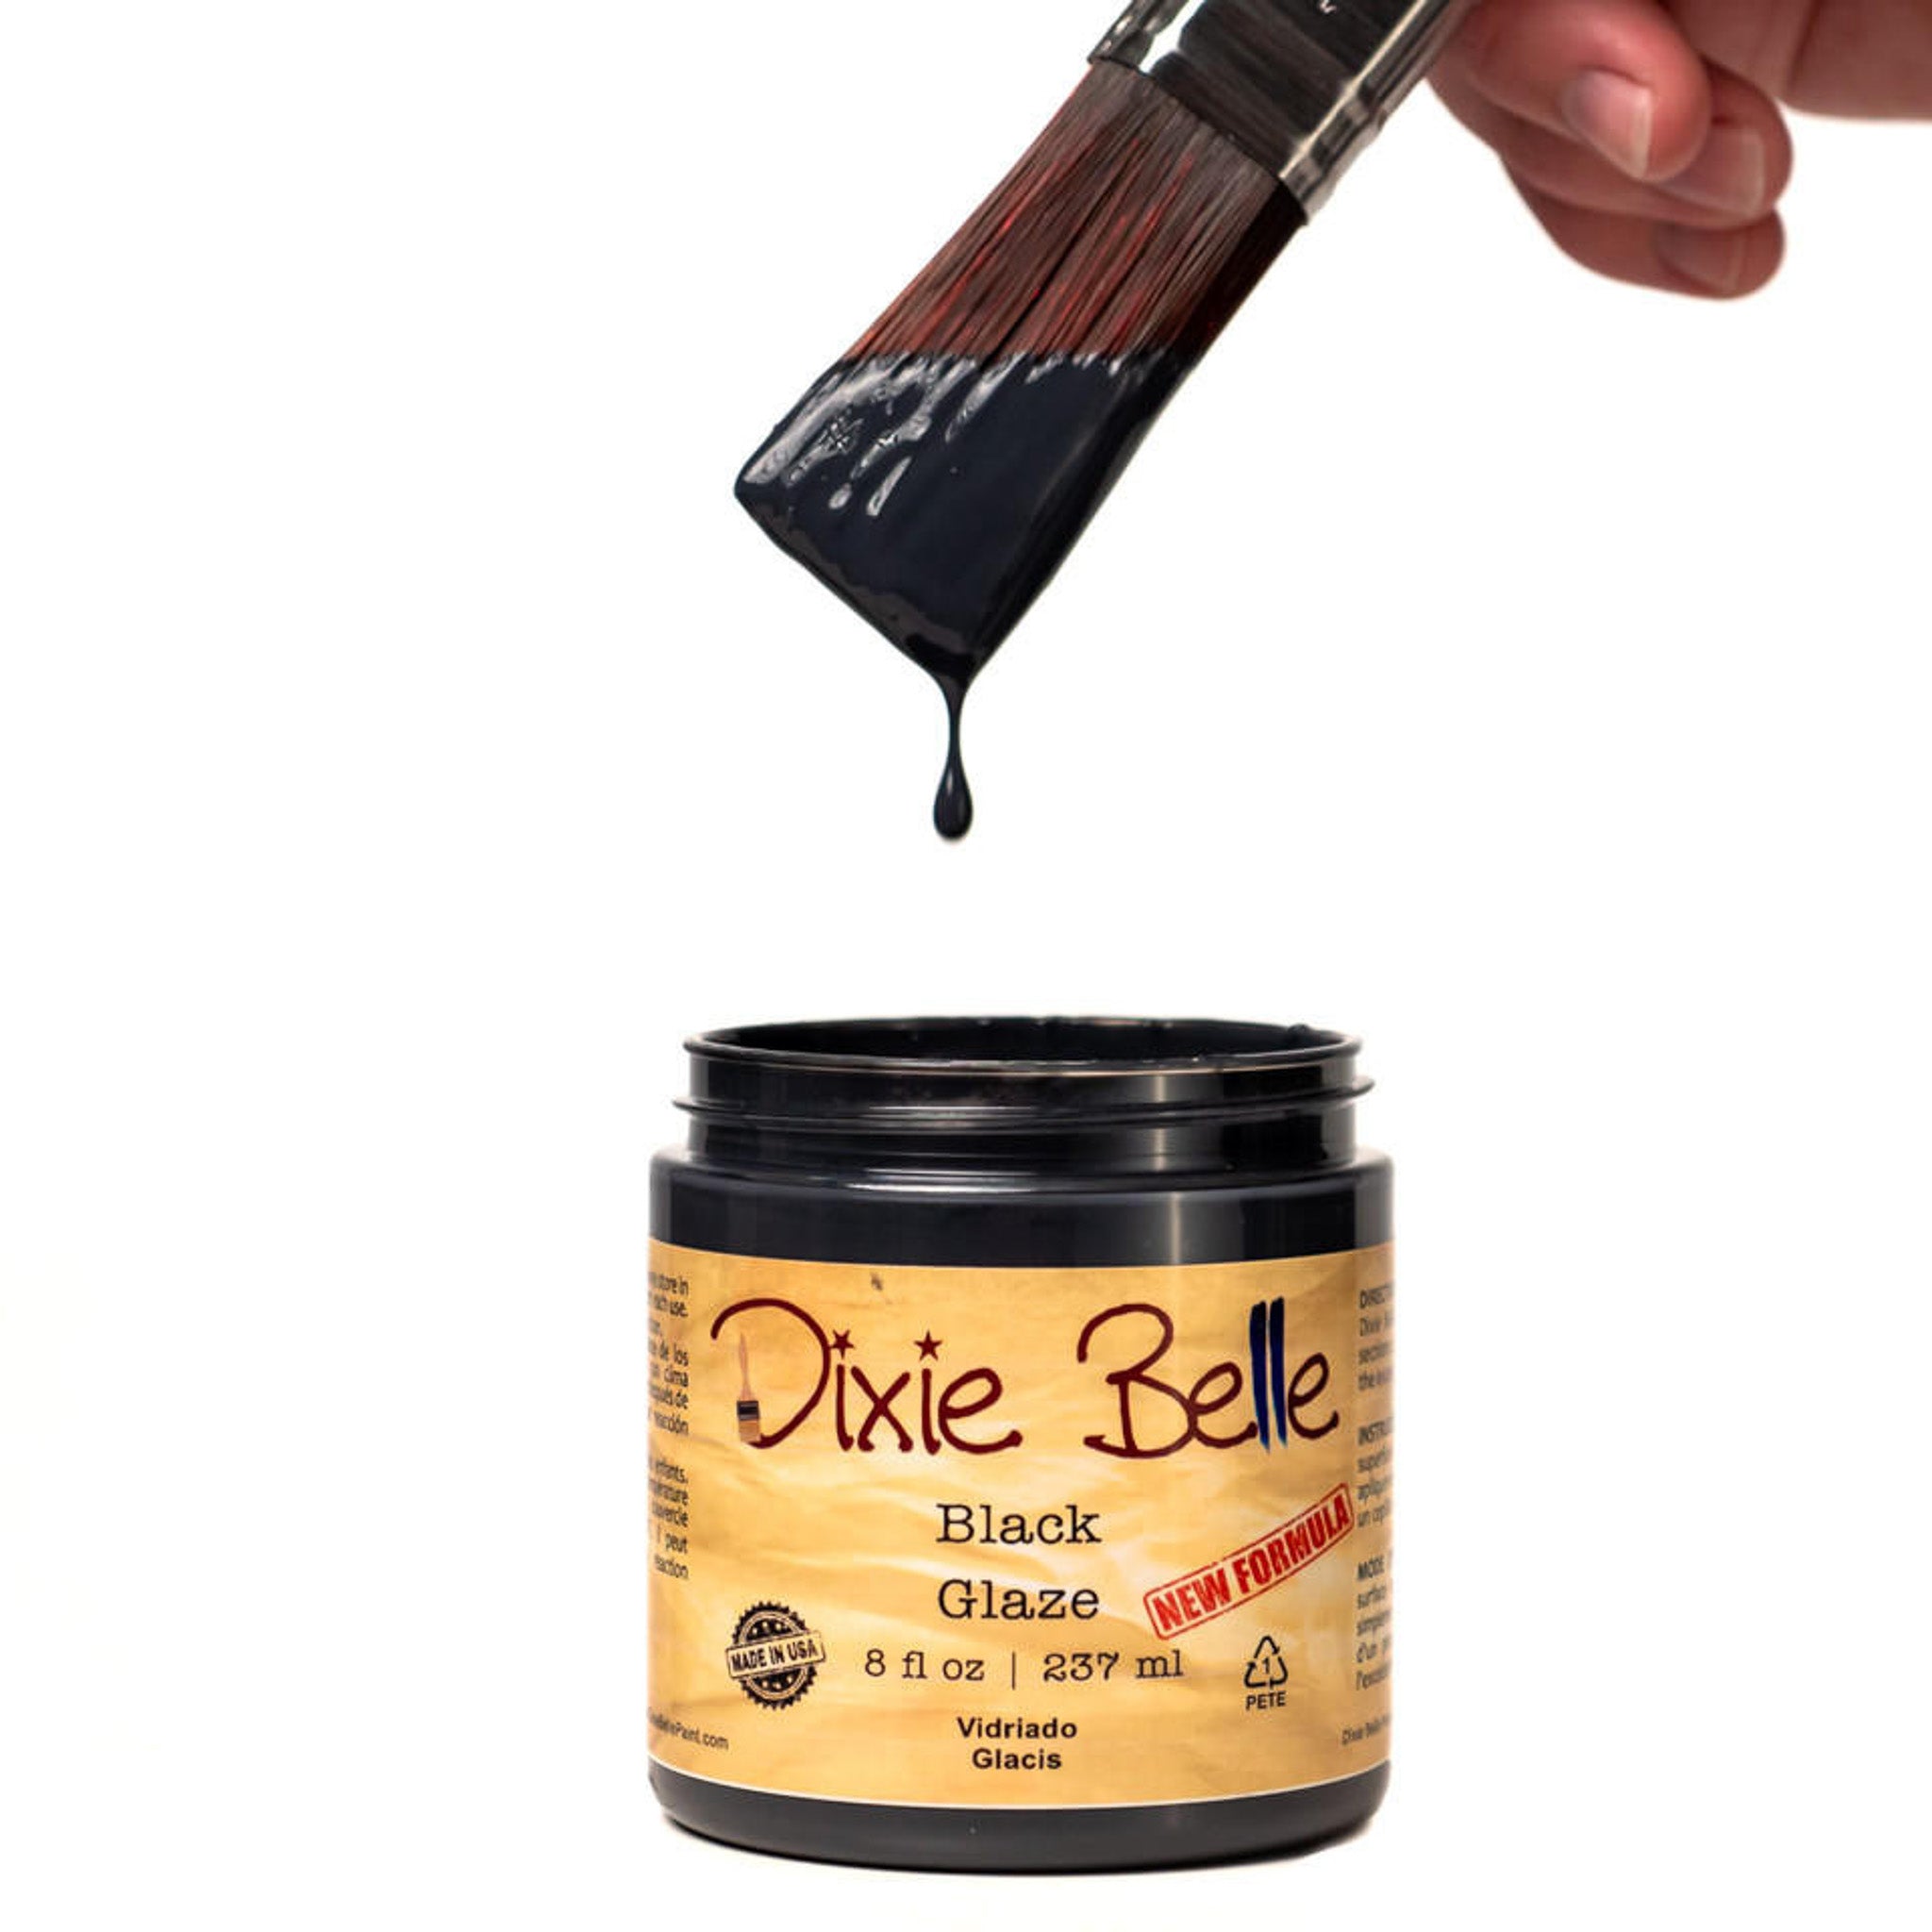 An open container of an 8oz/237ml Dixie Belle Black Glaze with a dripping paintbrush above it is against a white background.